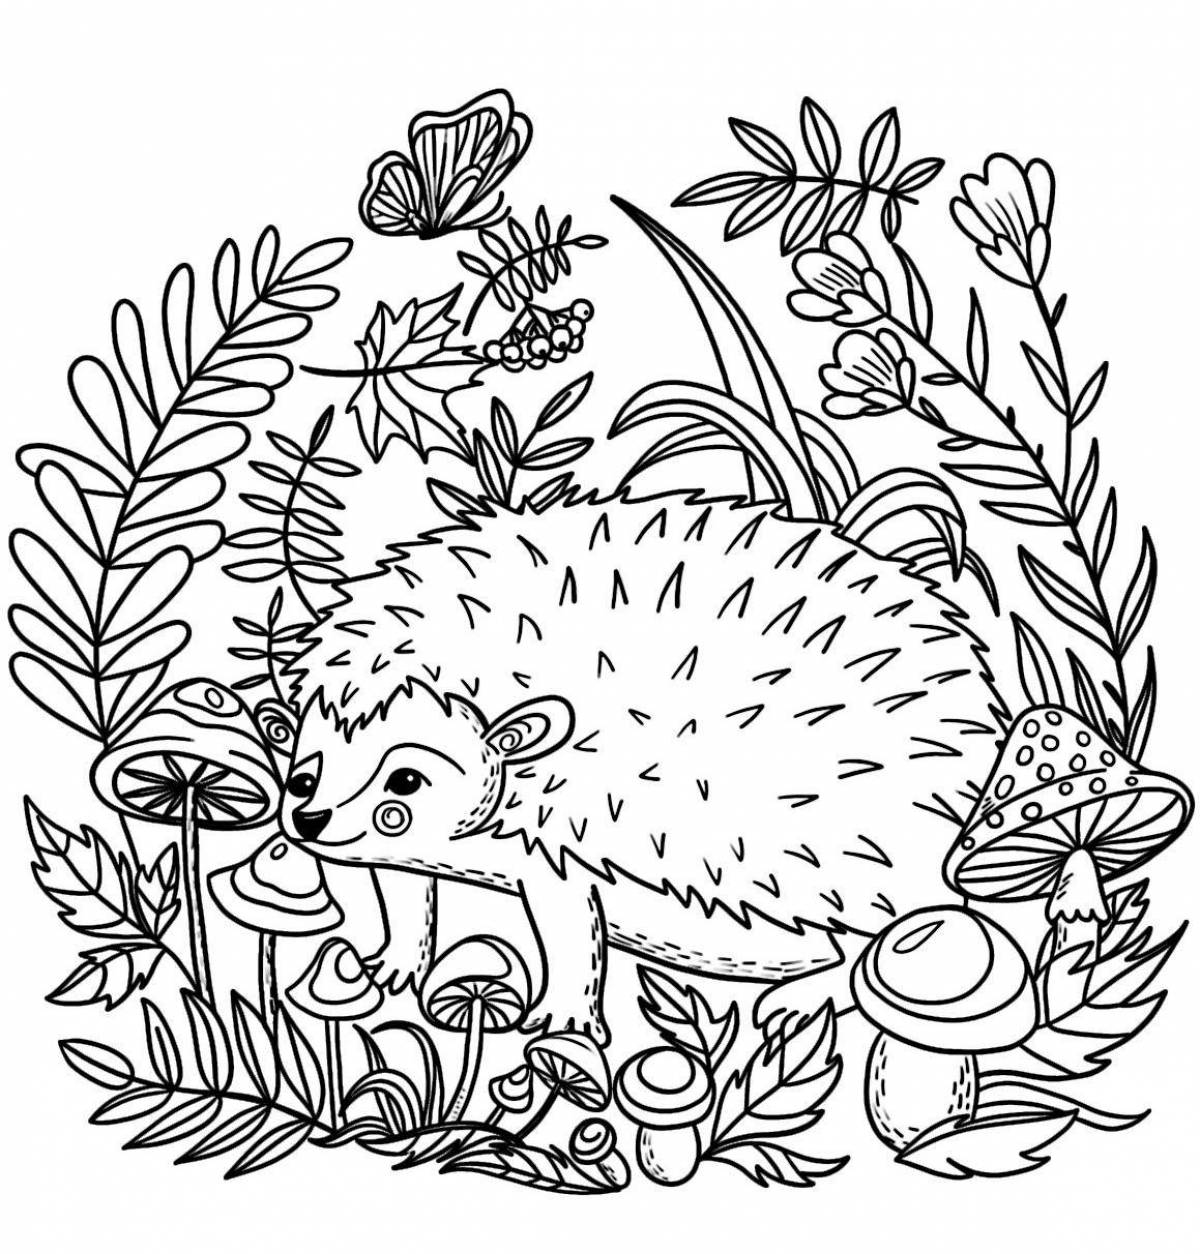 Drawing of a charming hedgehog